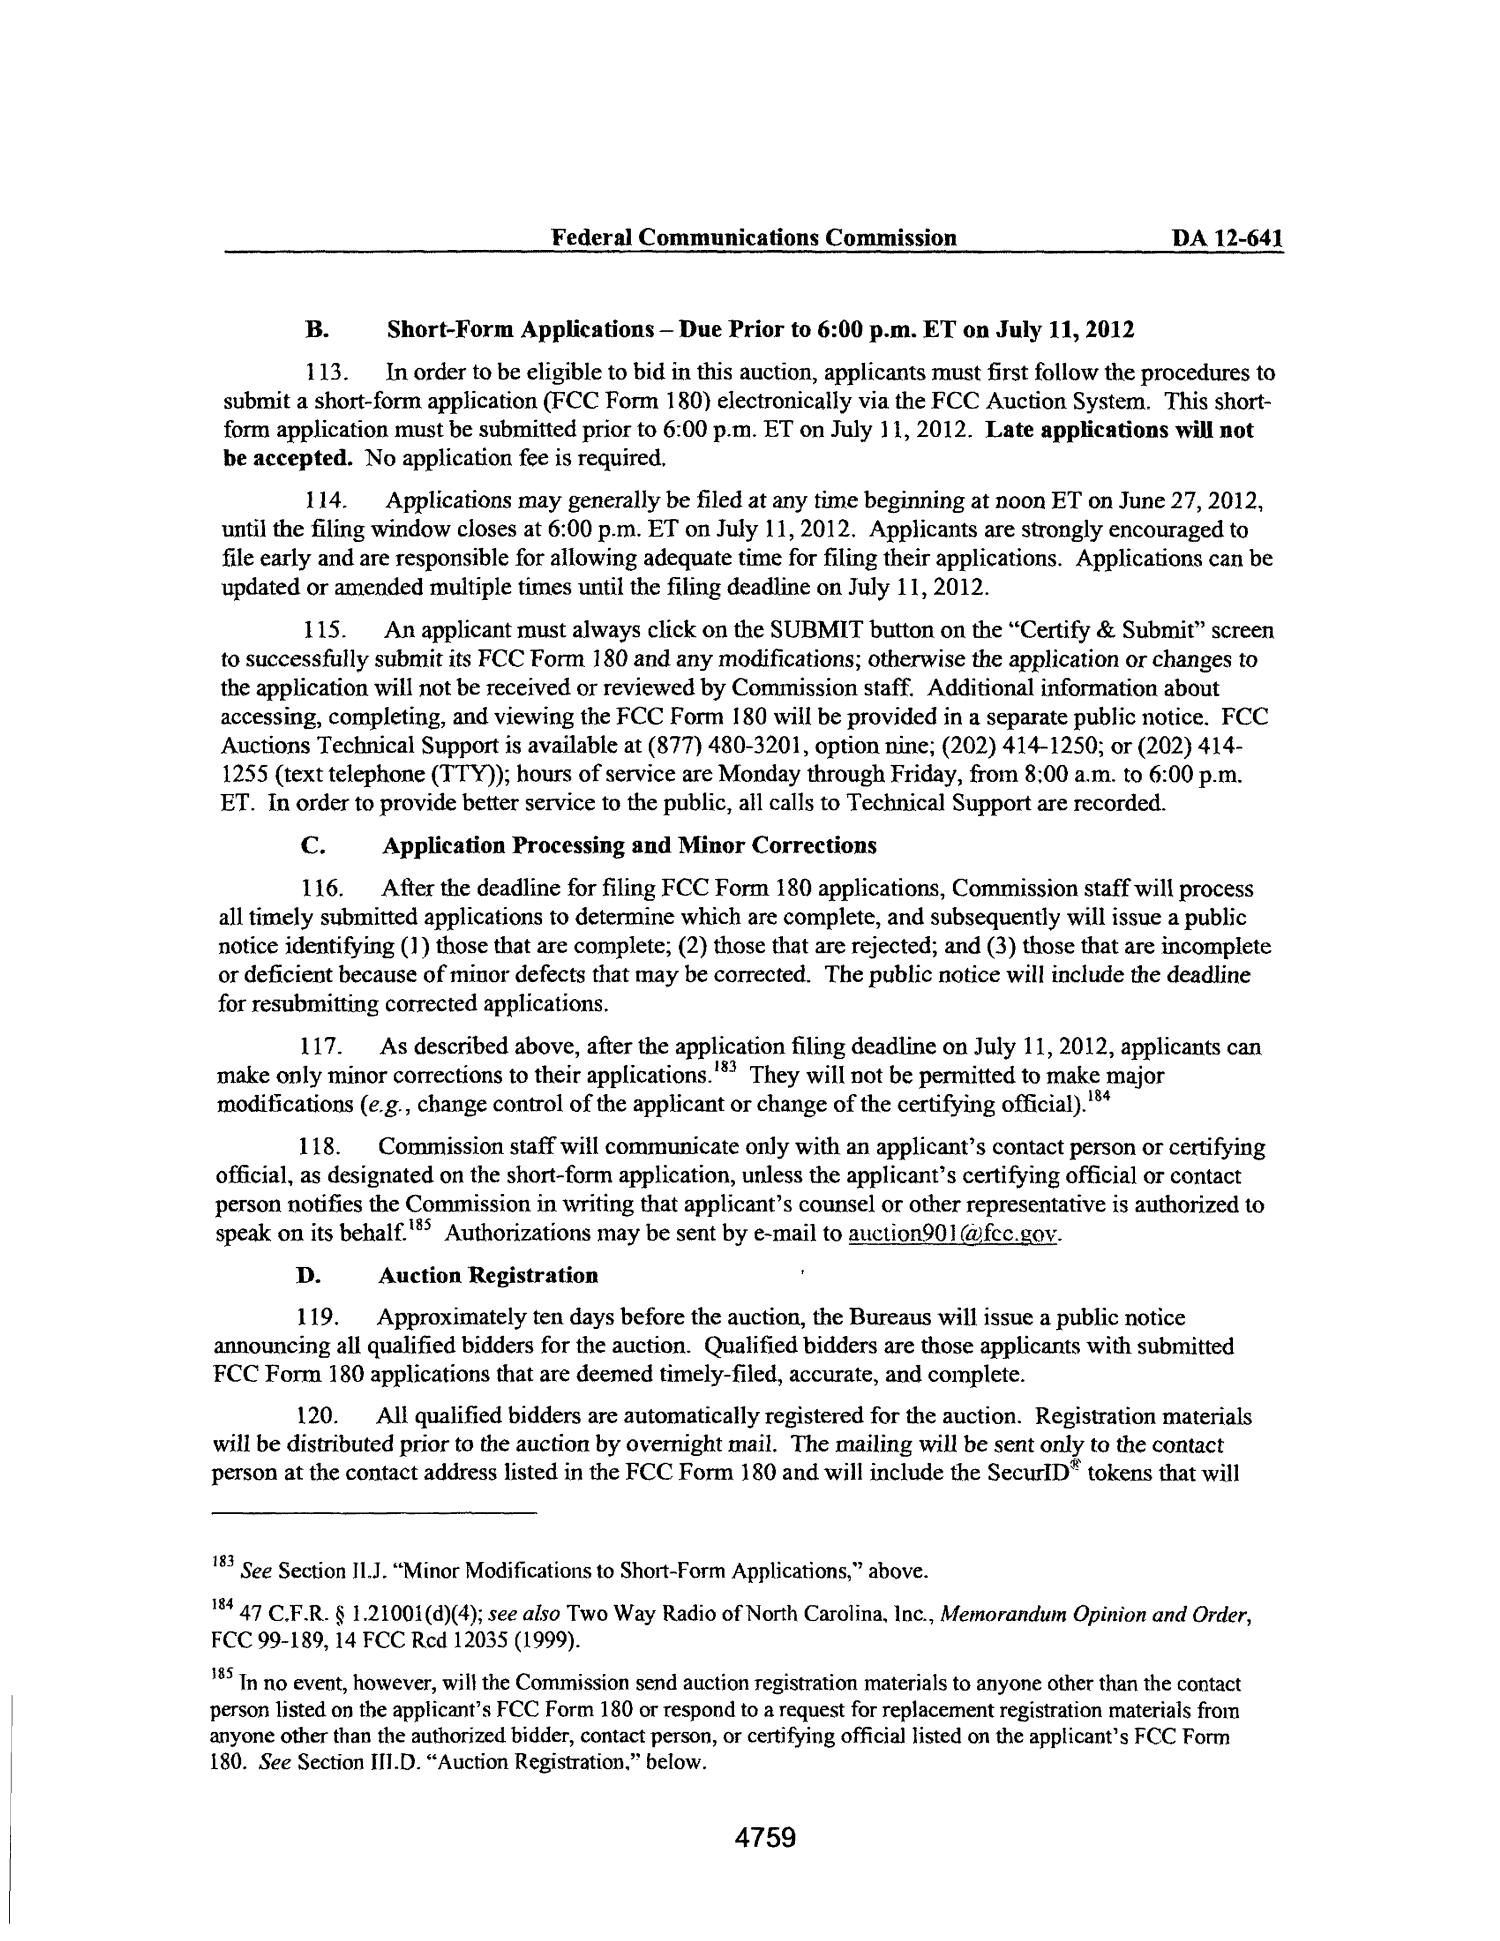 FCC Record, Volume 27, No. 6, Pages 4697 to 5673, April 30 - May 22, 2012
                                                
                                                    4759
                                                